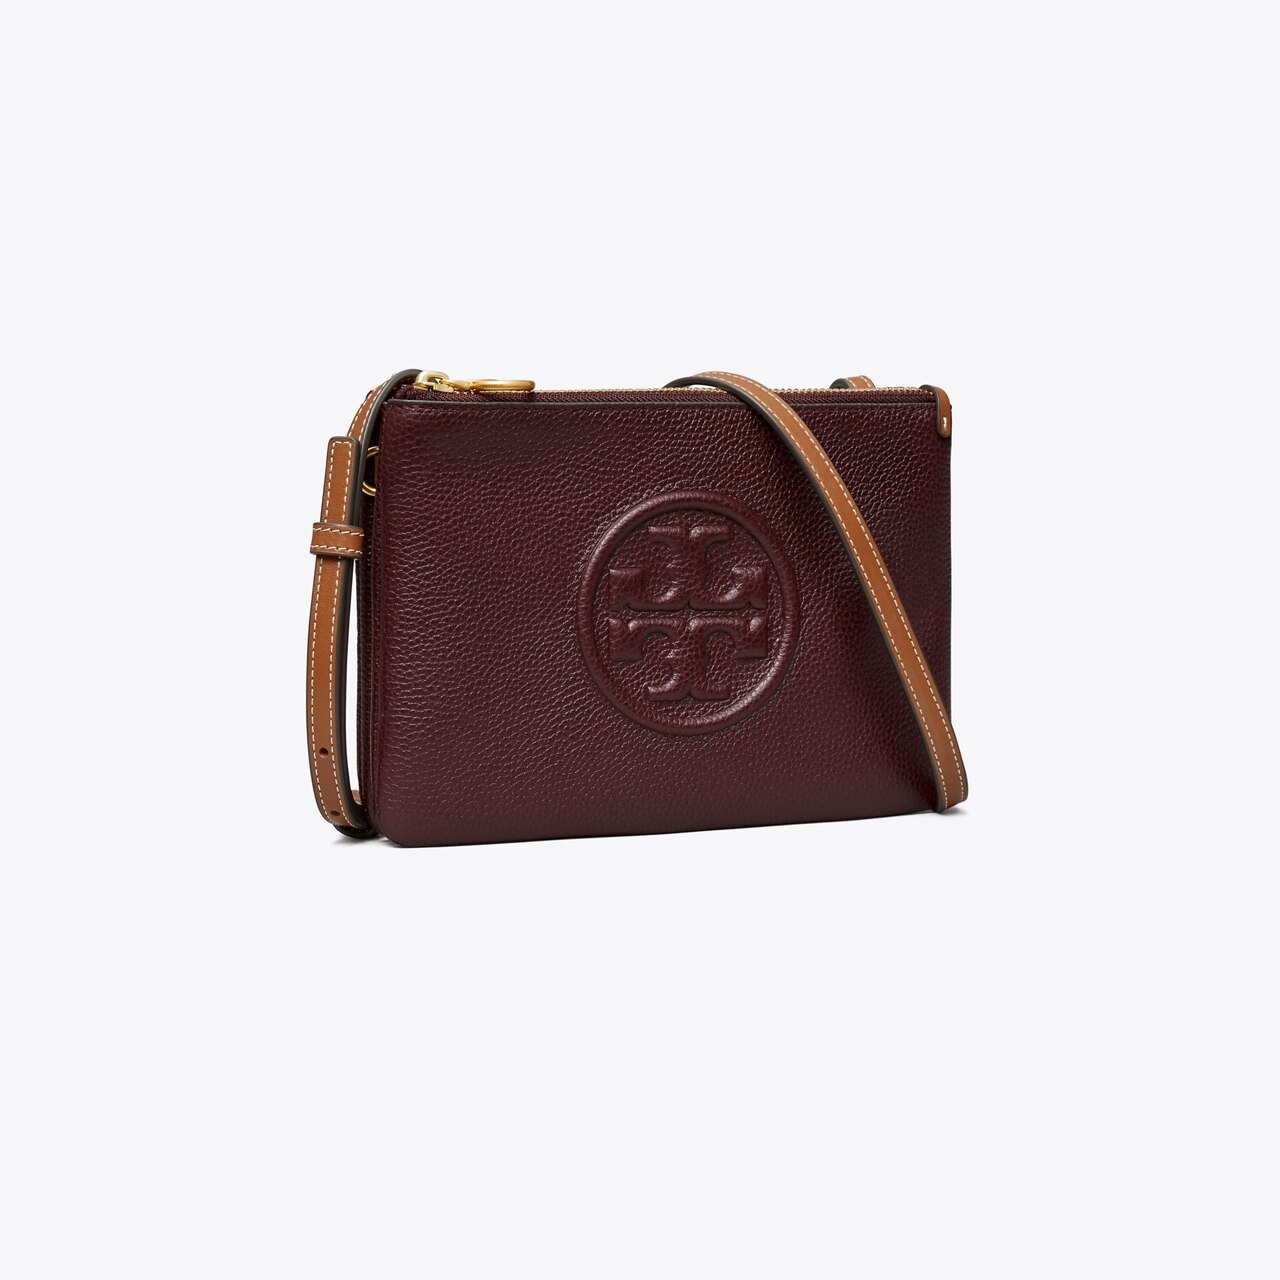 Tory Burch Robinson Pebbled Double-Zip Cross-Body in Natural